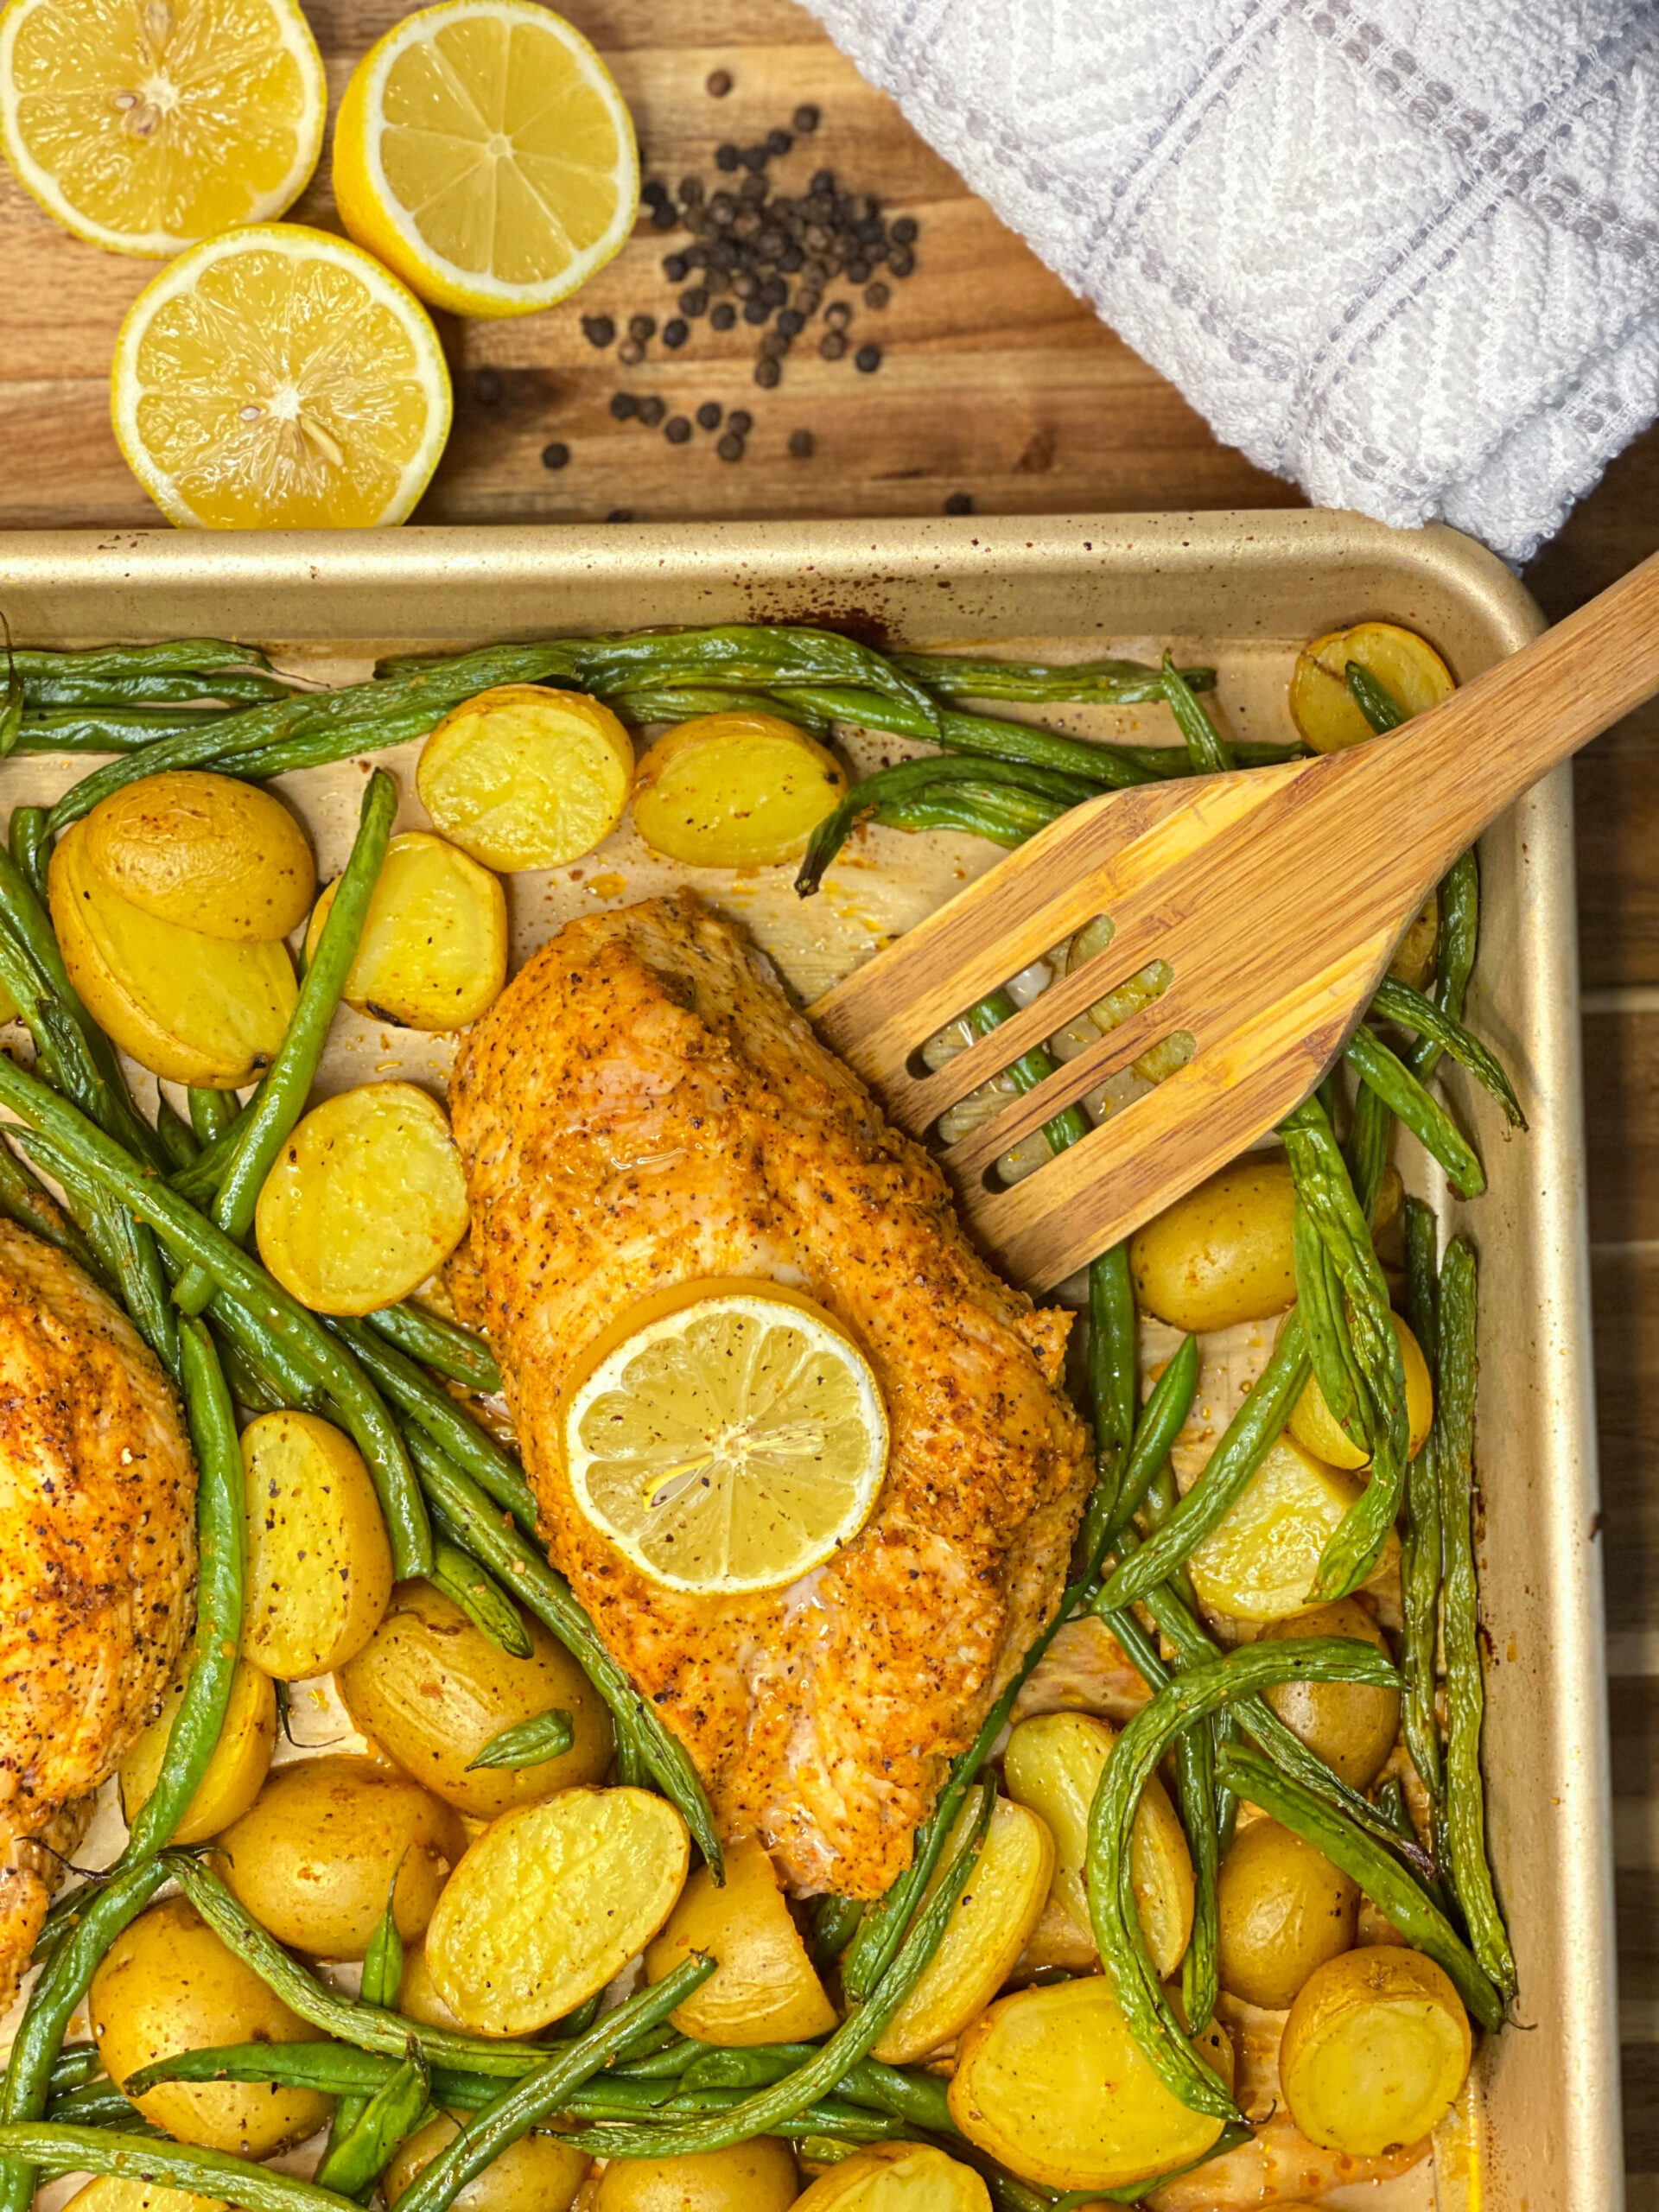 Sheet Pan Lemon Pepper Chicken with Roasted Green Beans and Yellow Potatoes